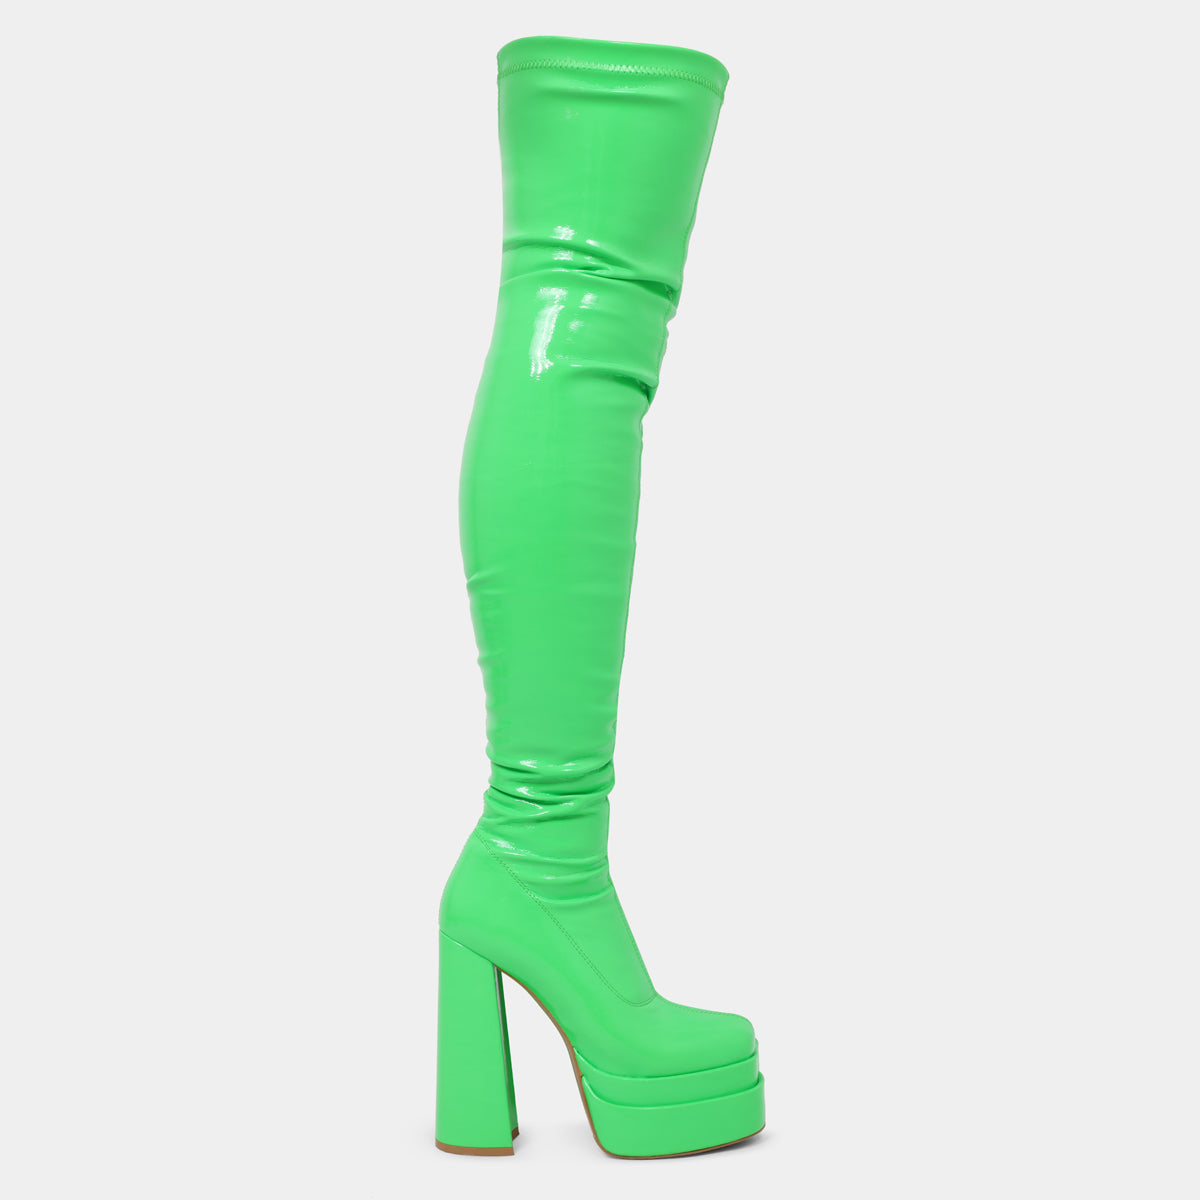 The Redemption Green Stretch Thigh High Boots - Long Boots - KOI Footwear - Green - Side View